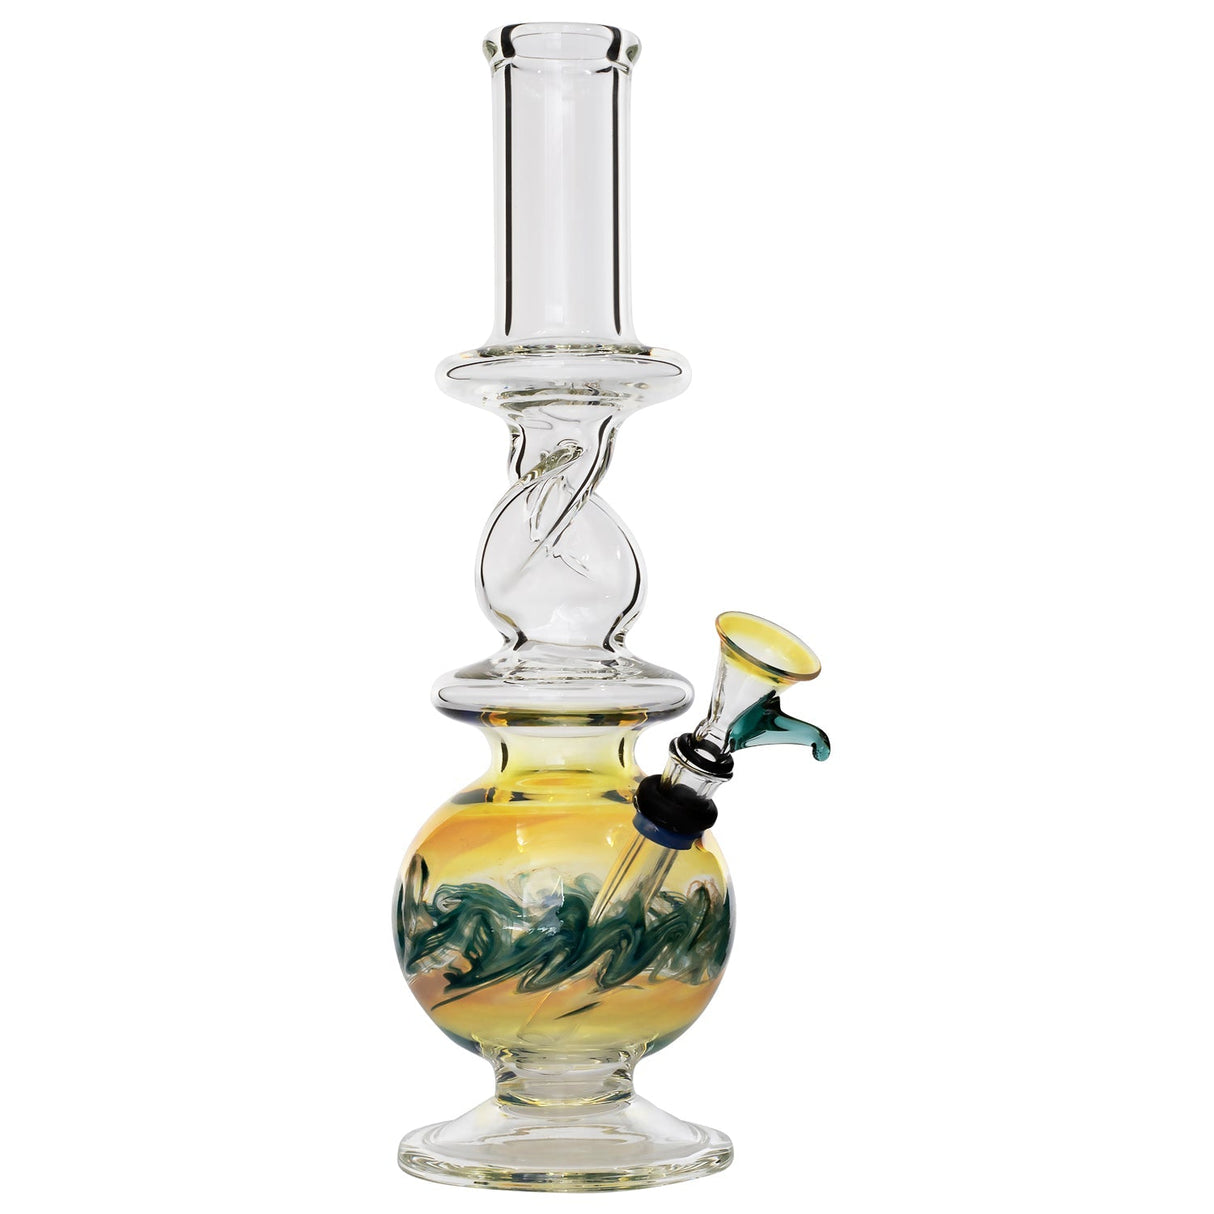 LA Pipes "The Typhoon Twister" Glass Bong (Various Colors)